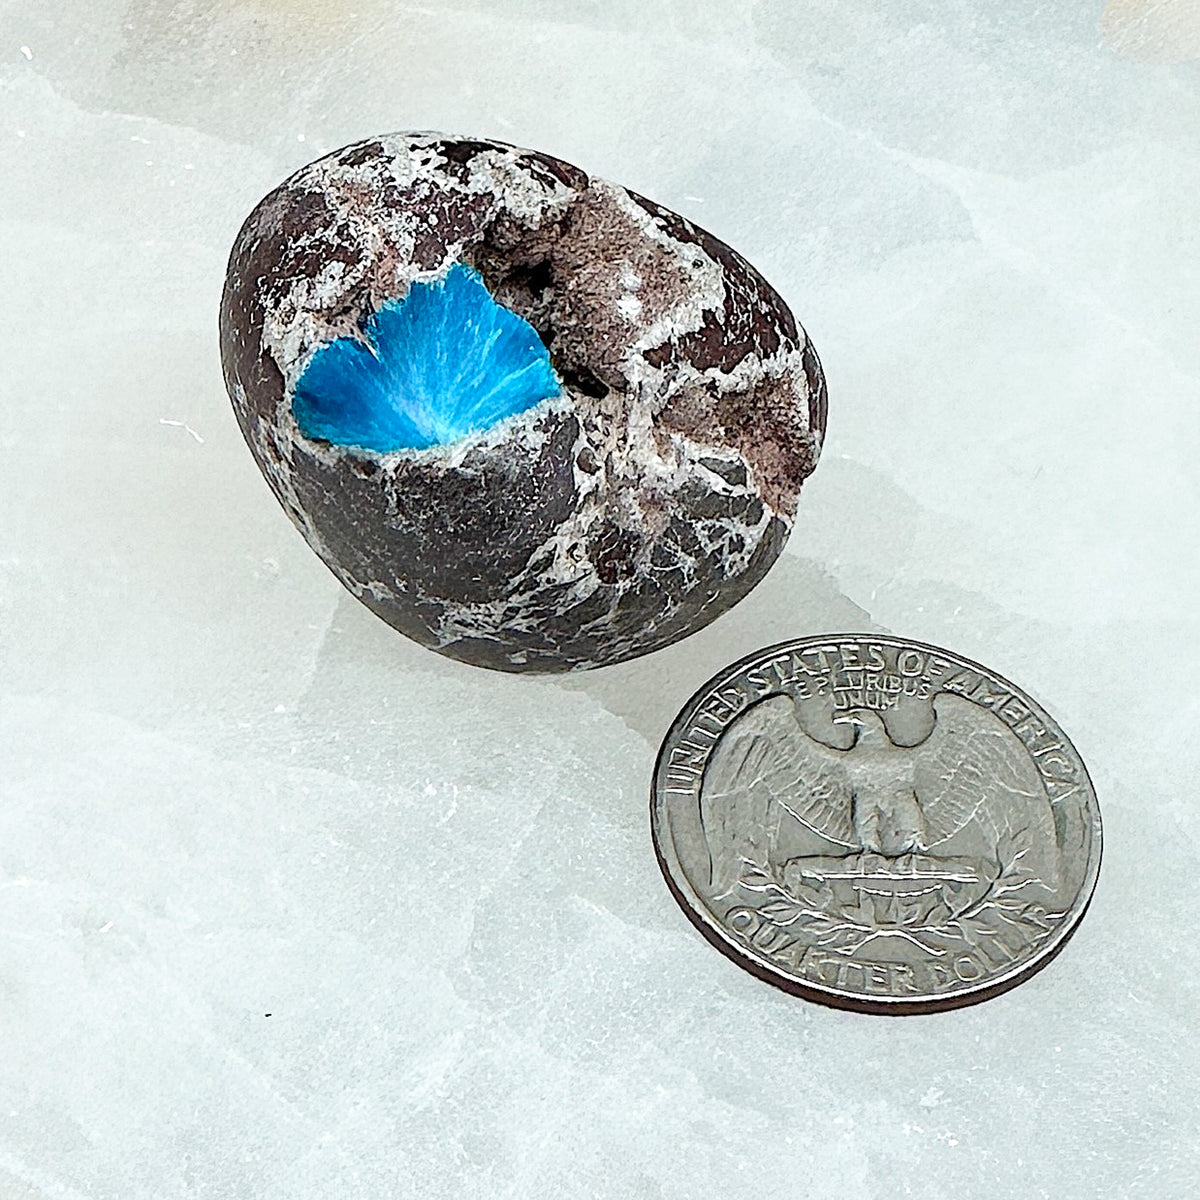 Comparison shot of a US quarter coin and a cavansite tumbled stone